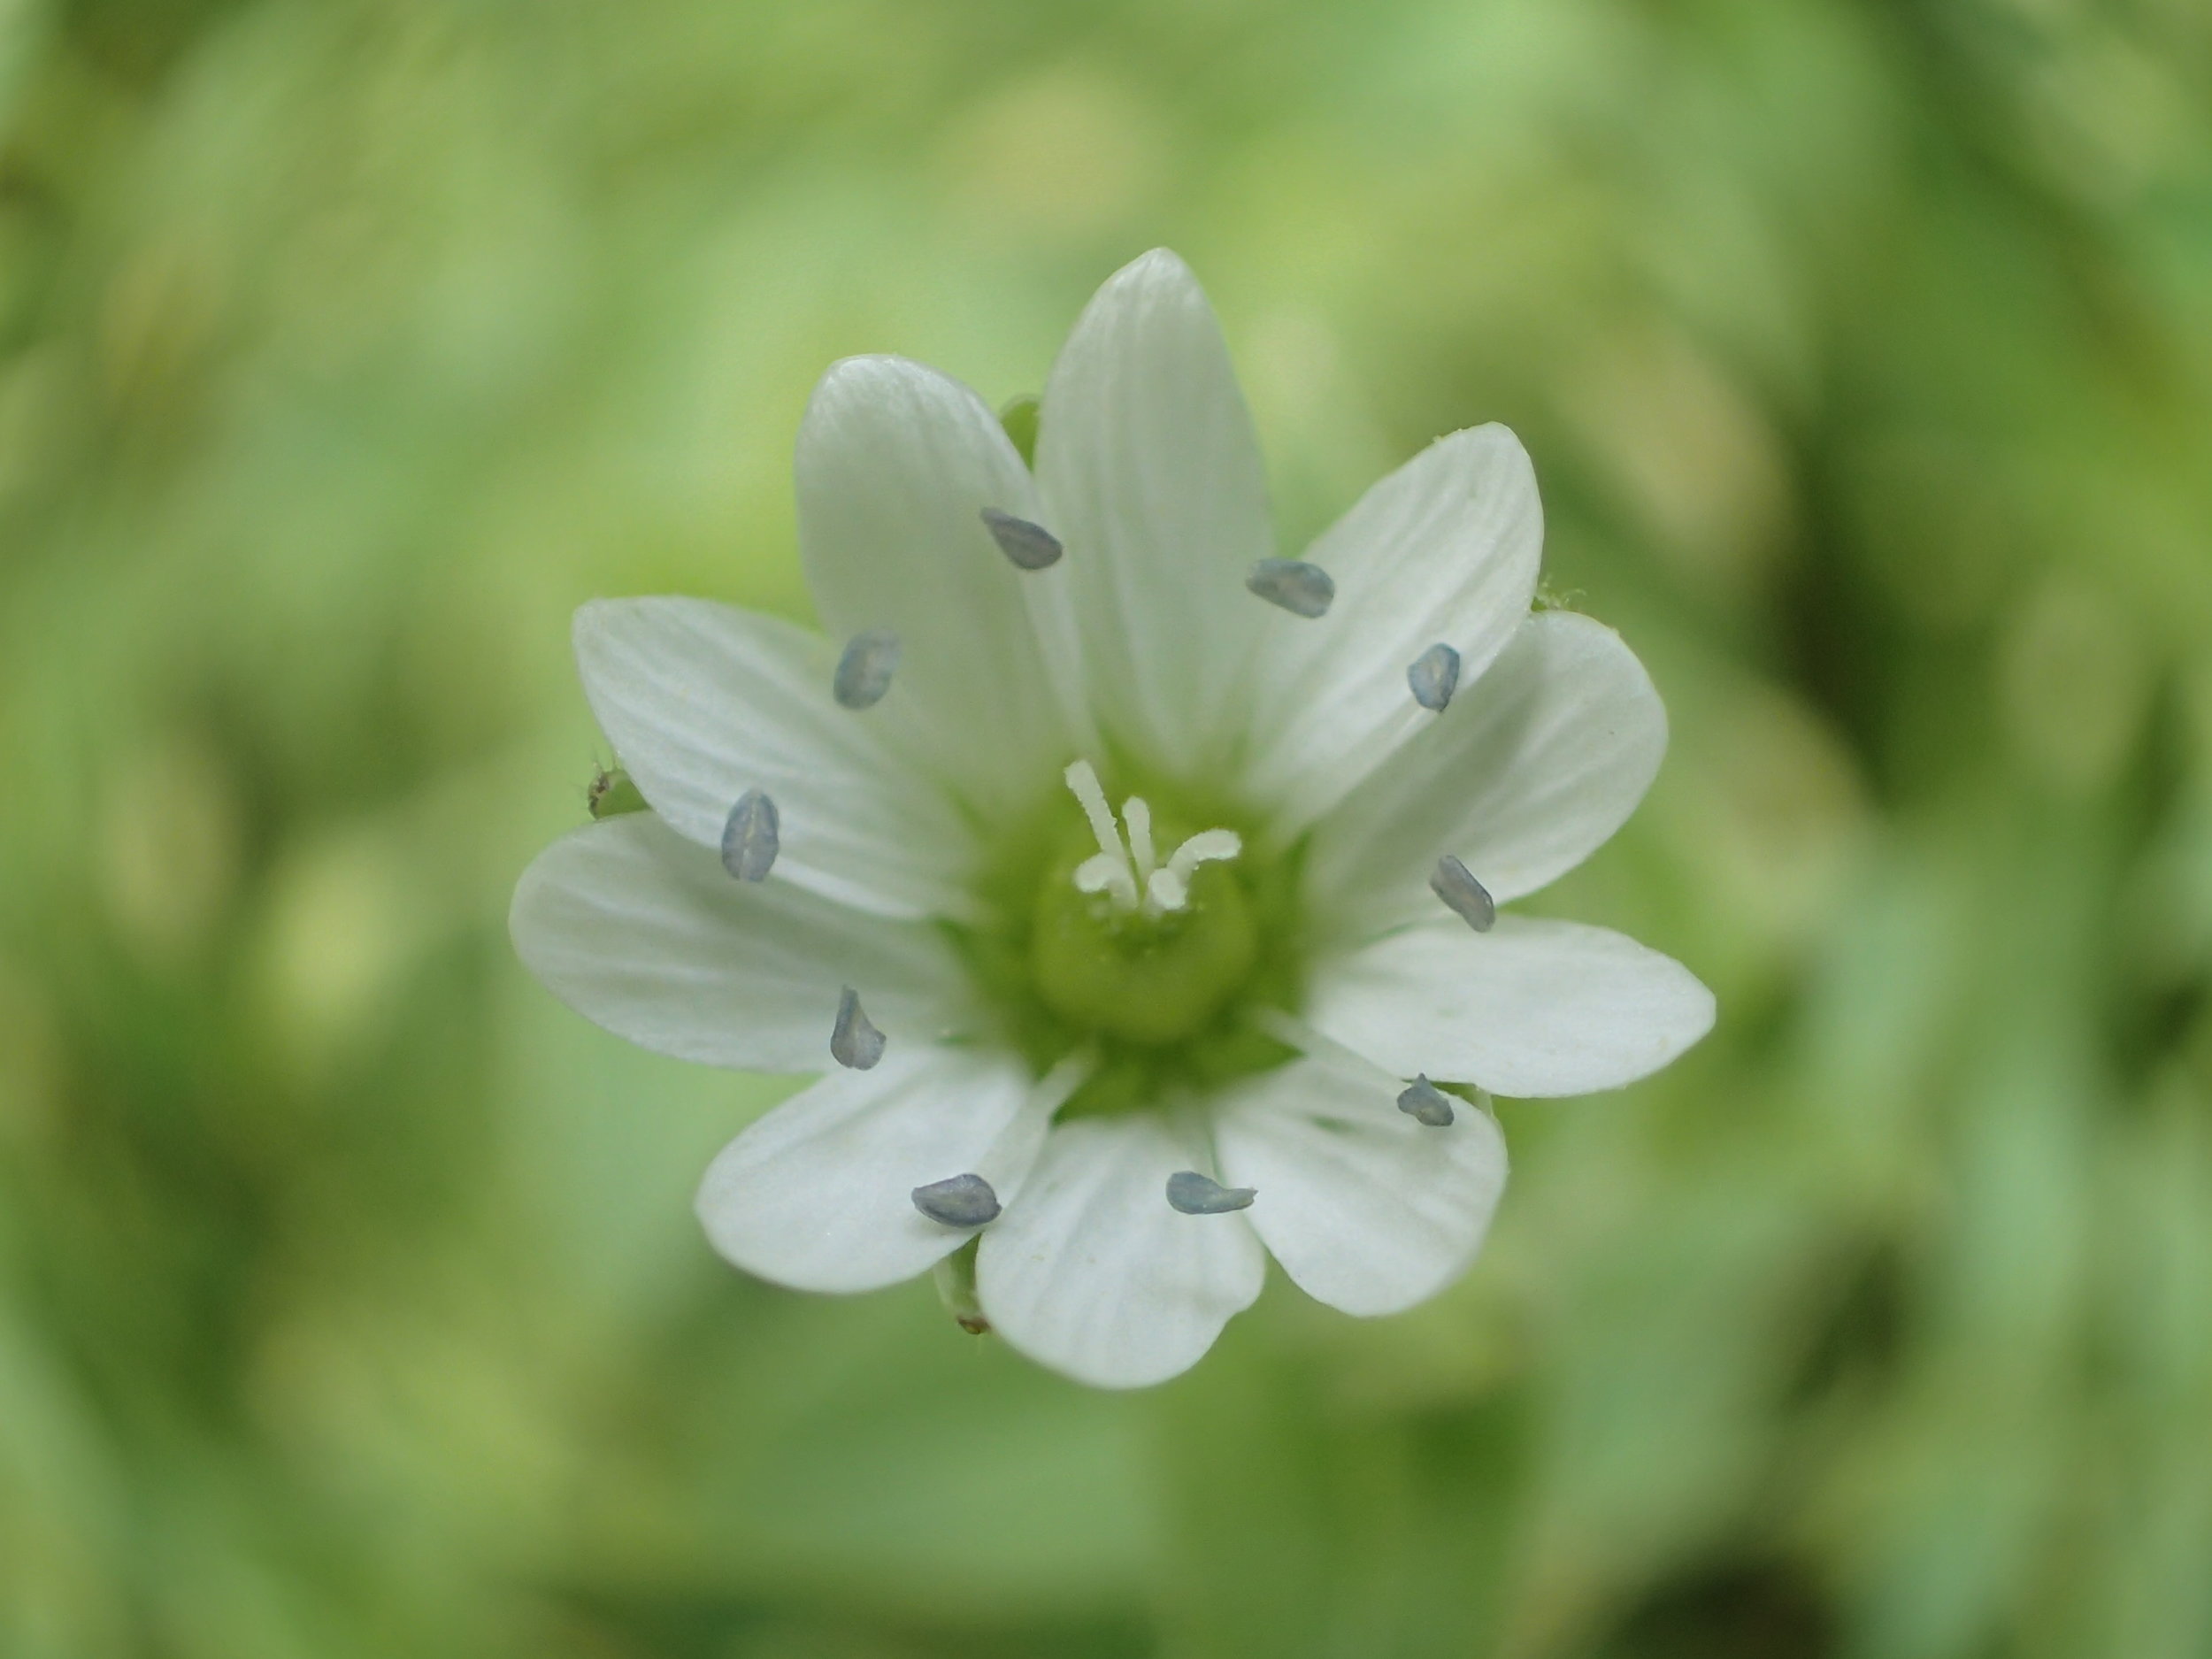 Chickweed up close and personal